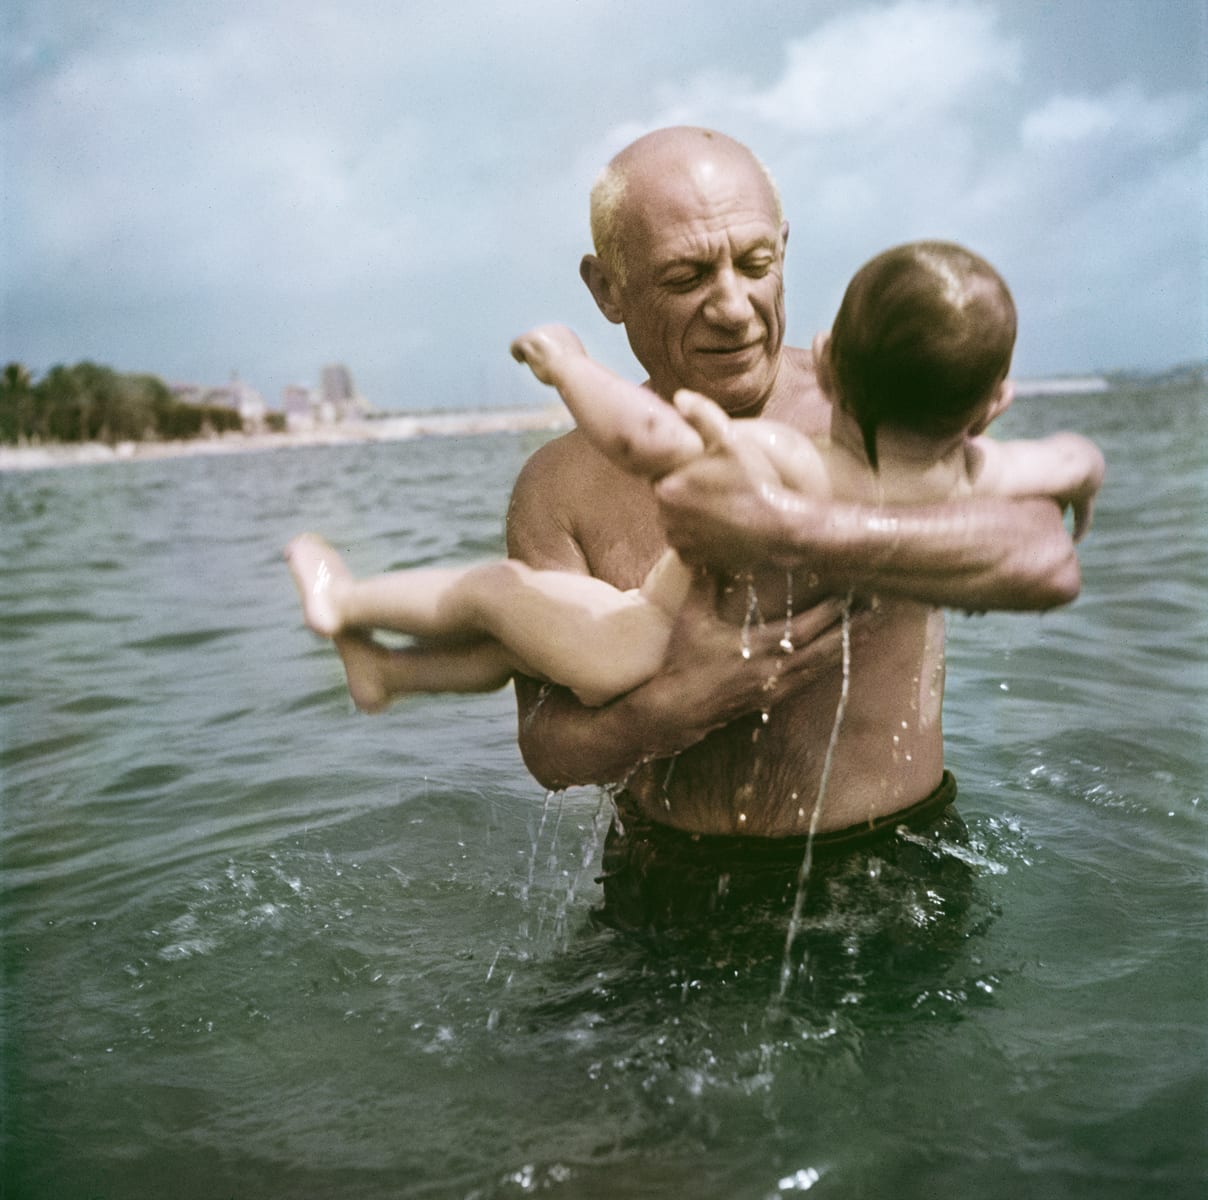 Pablo Picasso playing in the water with his son Claude, Vallauris, France, 1948. © Robert Capa/International Center of Photography/Magnum Photos.